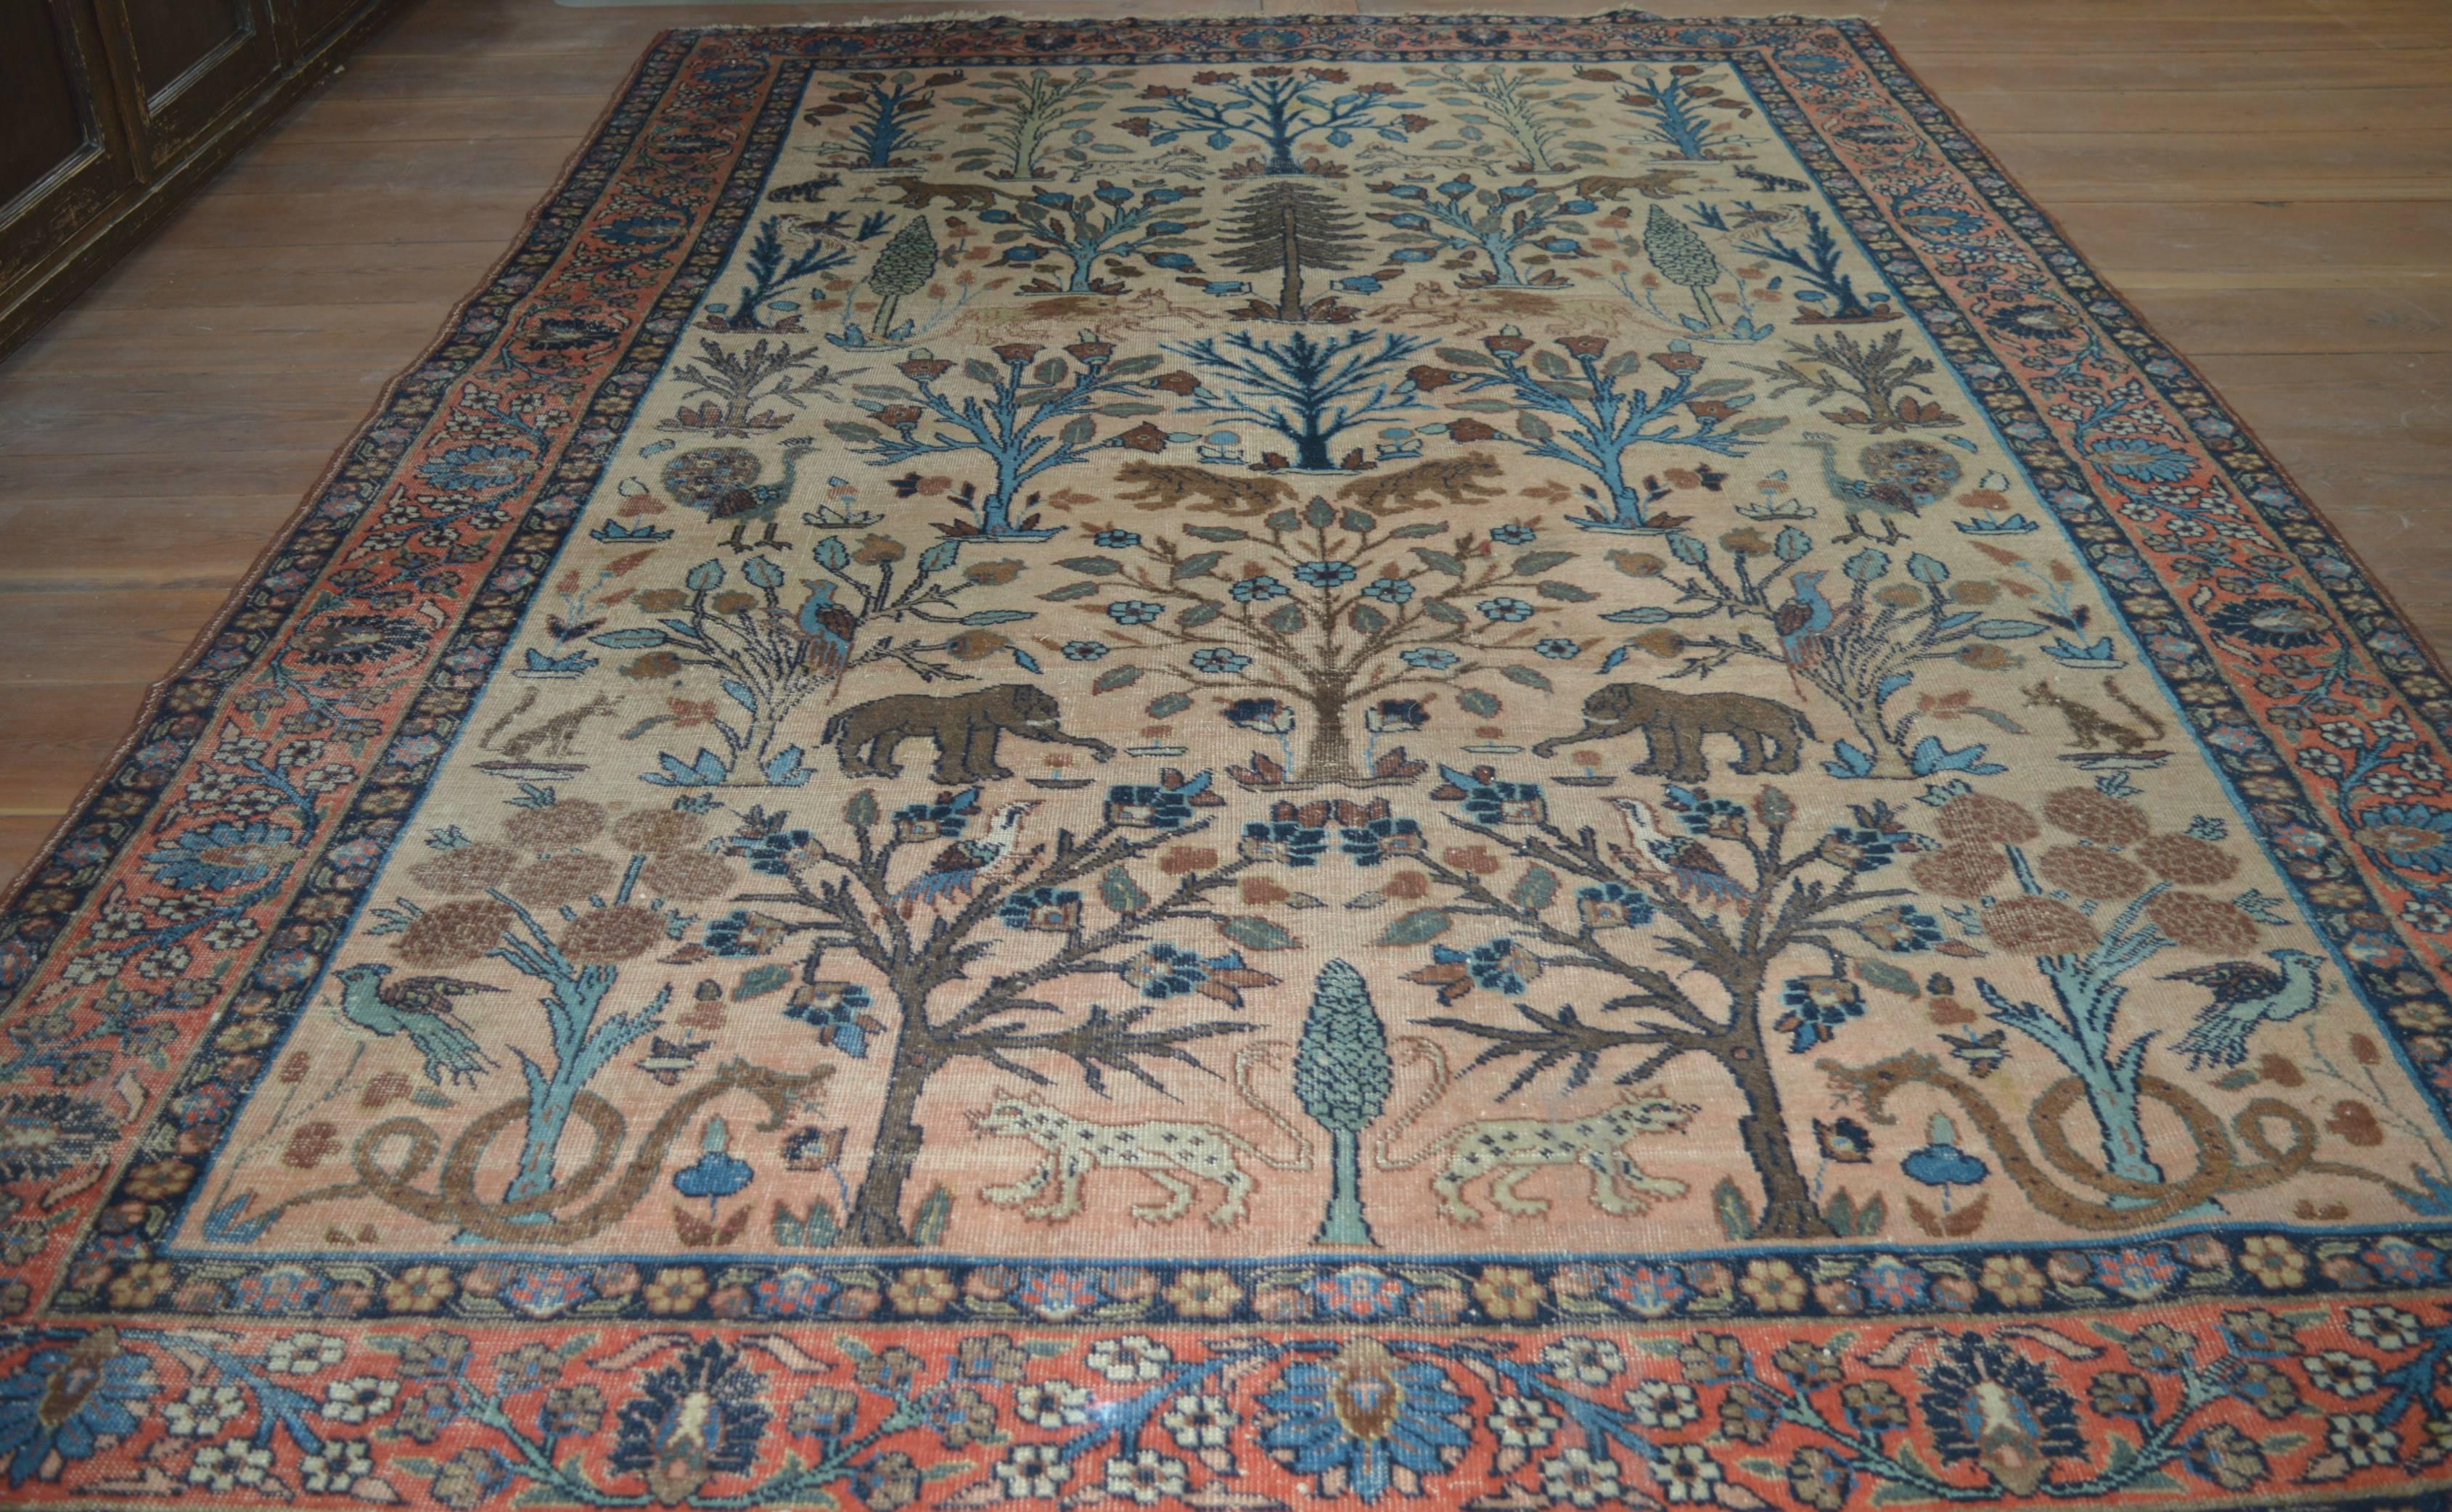 A stunning and rare 19th century Persian Sultanabad carpet depicting wild jungle animals, birds and foliage. 
The natural dyes retain their rich and subtle colors that Sultanabad carpets are known for.
Beautiful abrash and overall wear.